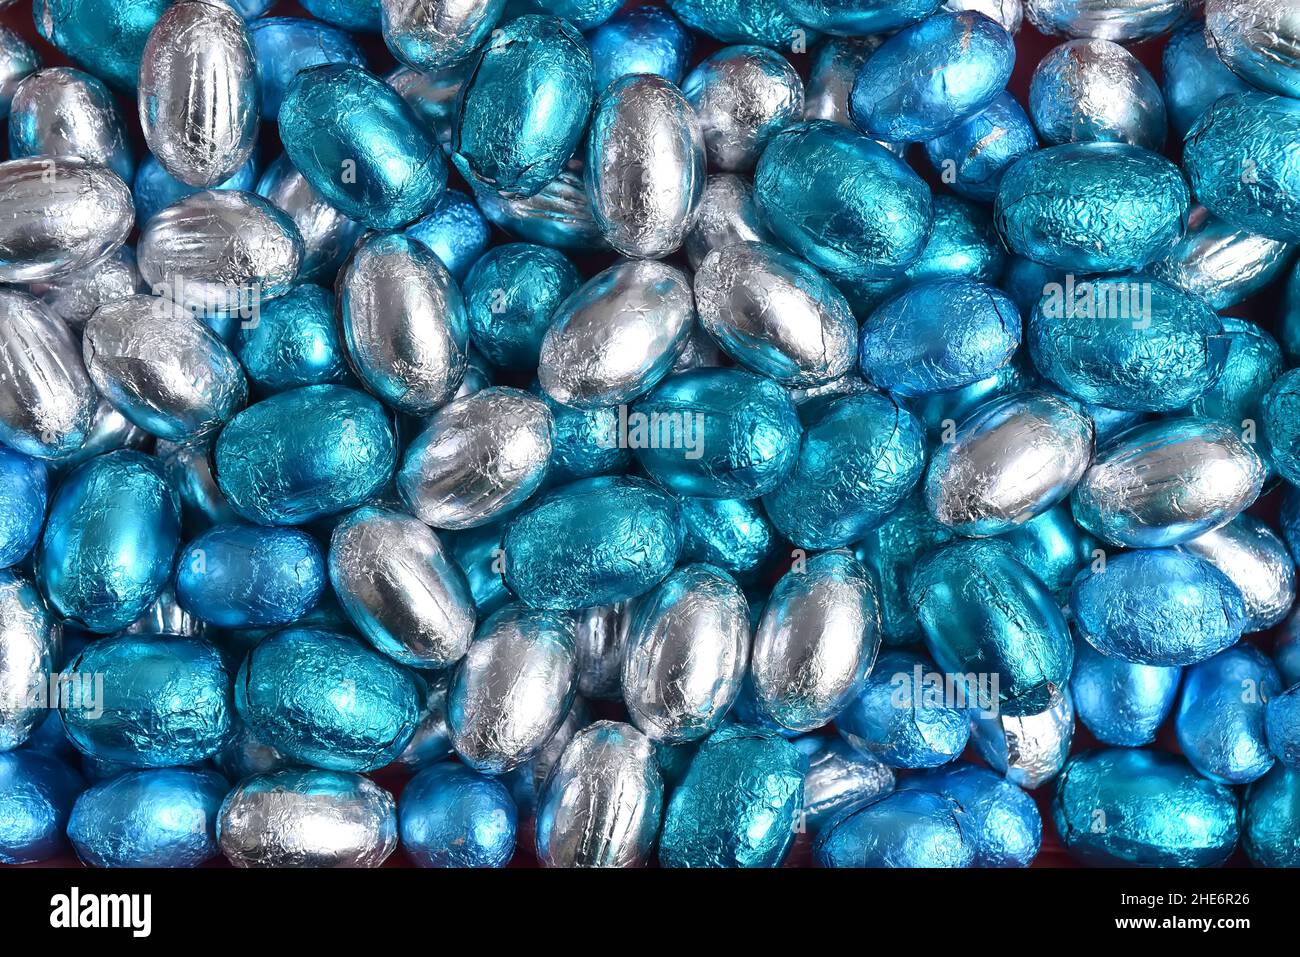 Blue, silver and turquoise foil wrapped chocolate easter eggs, against a black background. Stock Photo